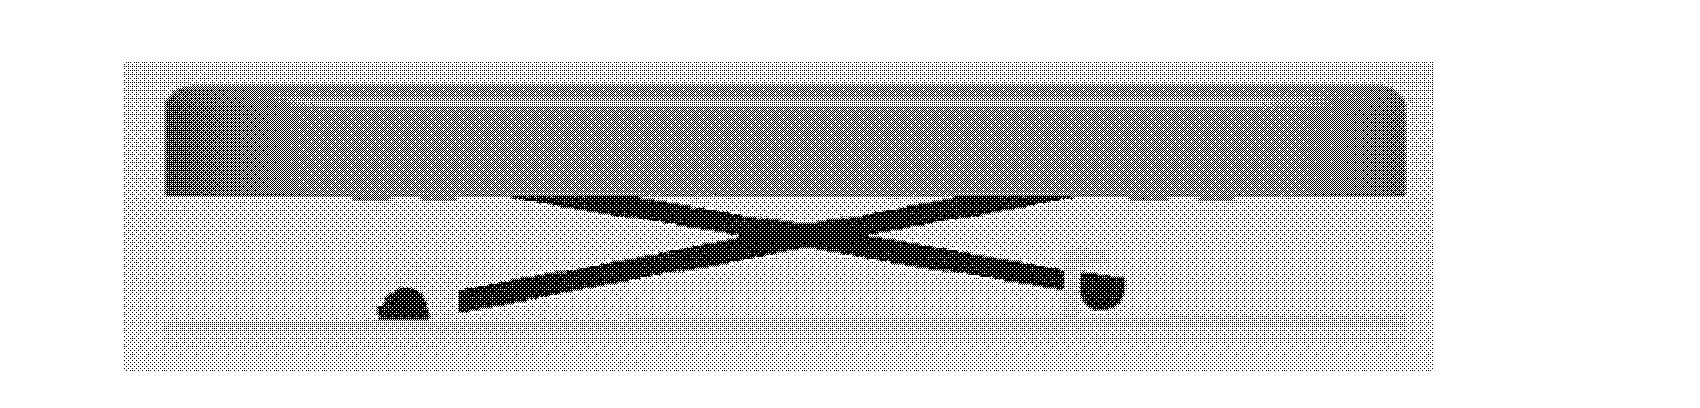 Keyboard and assembling method for keyboard